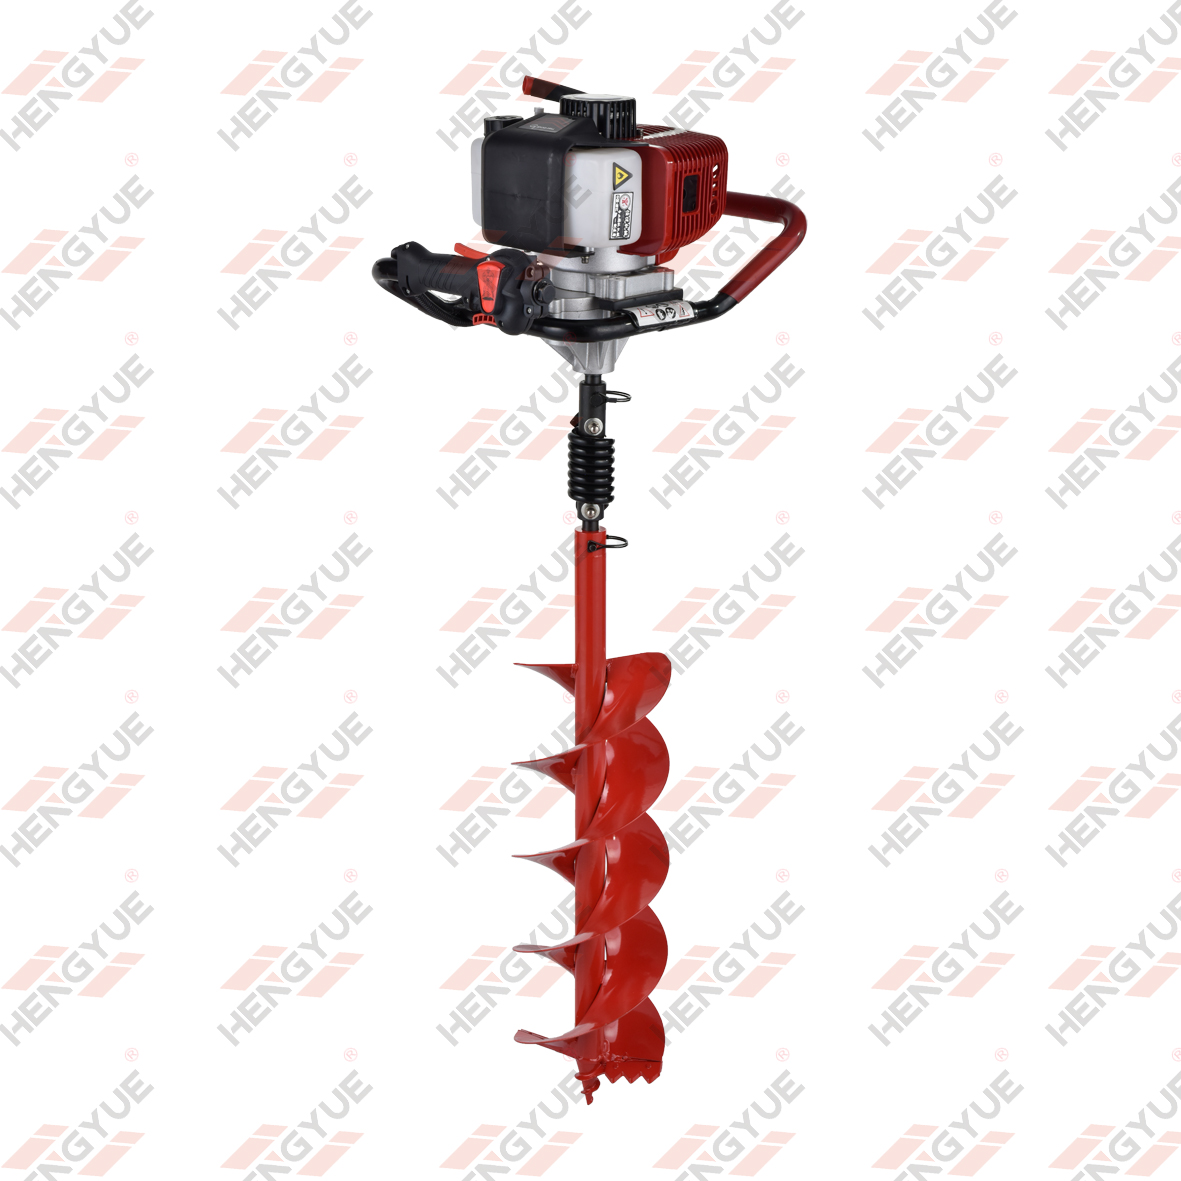 43CC Hand Held Earth Auger Machine 